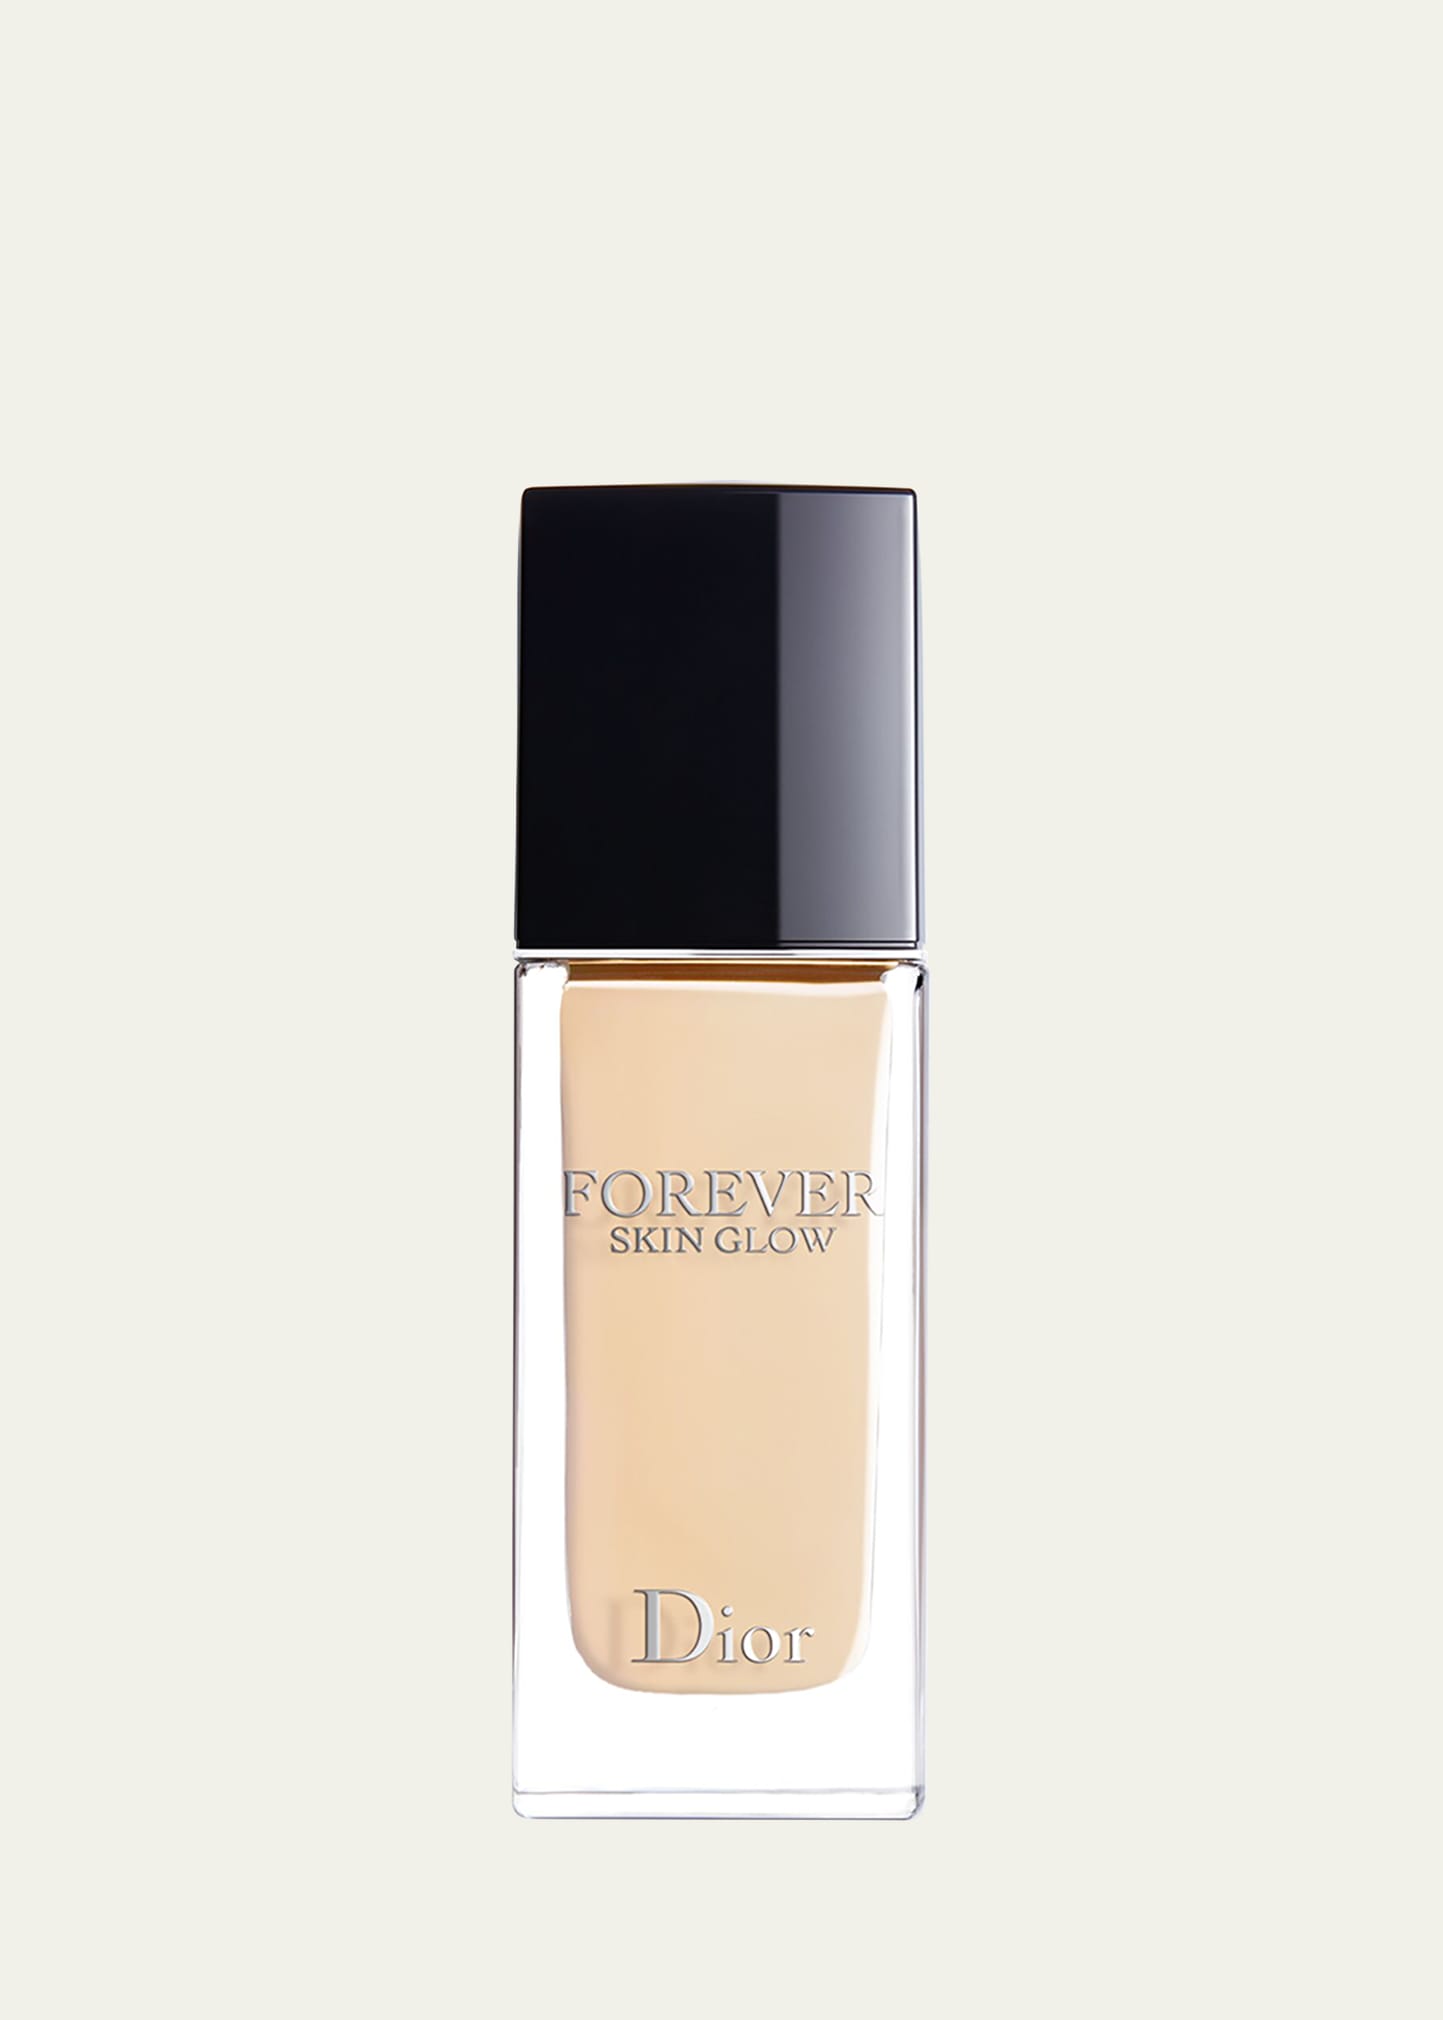 Dior 1 Oz.  Forever Skin Glow Hydrating Foundation Spf 15 In 1 Neutral